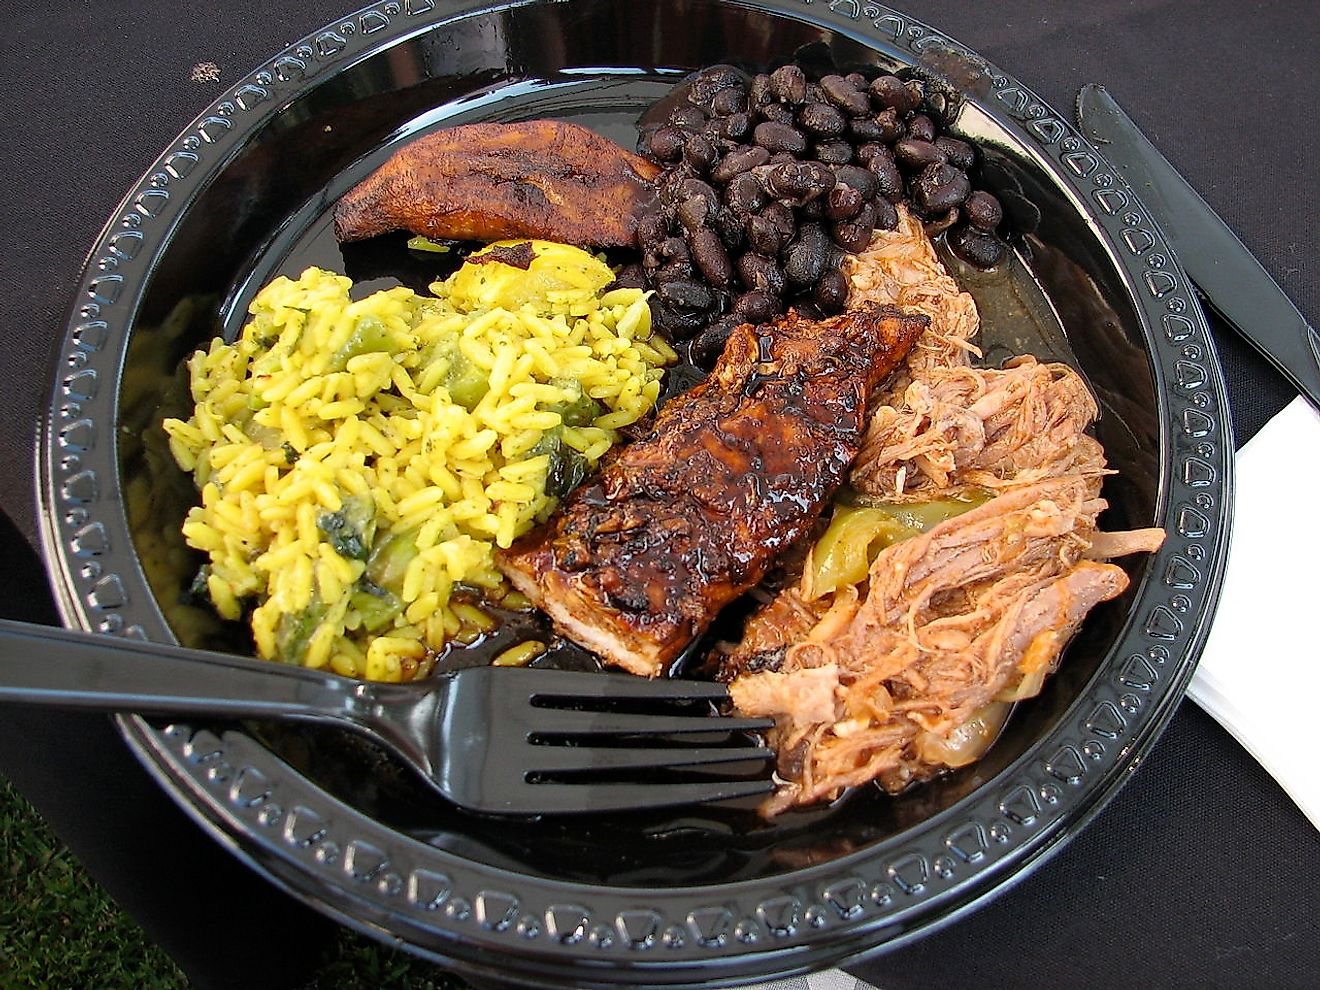 A typical Cuban dinner - Shredded beef, jerk chicken, black beans and plantains. Image credit: Mulling it Over/Wikimedia.org